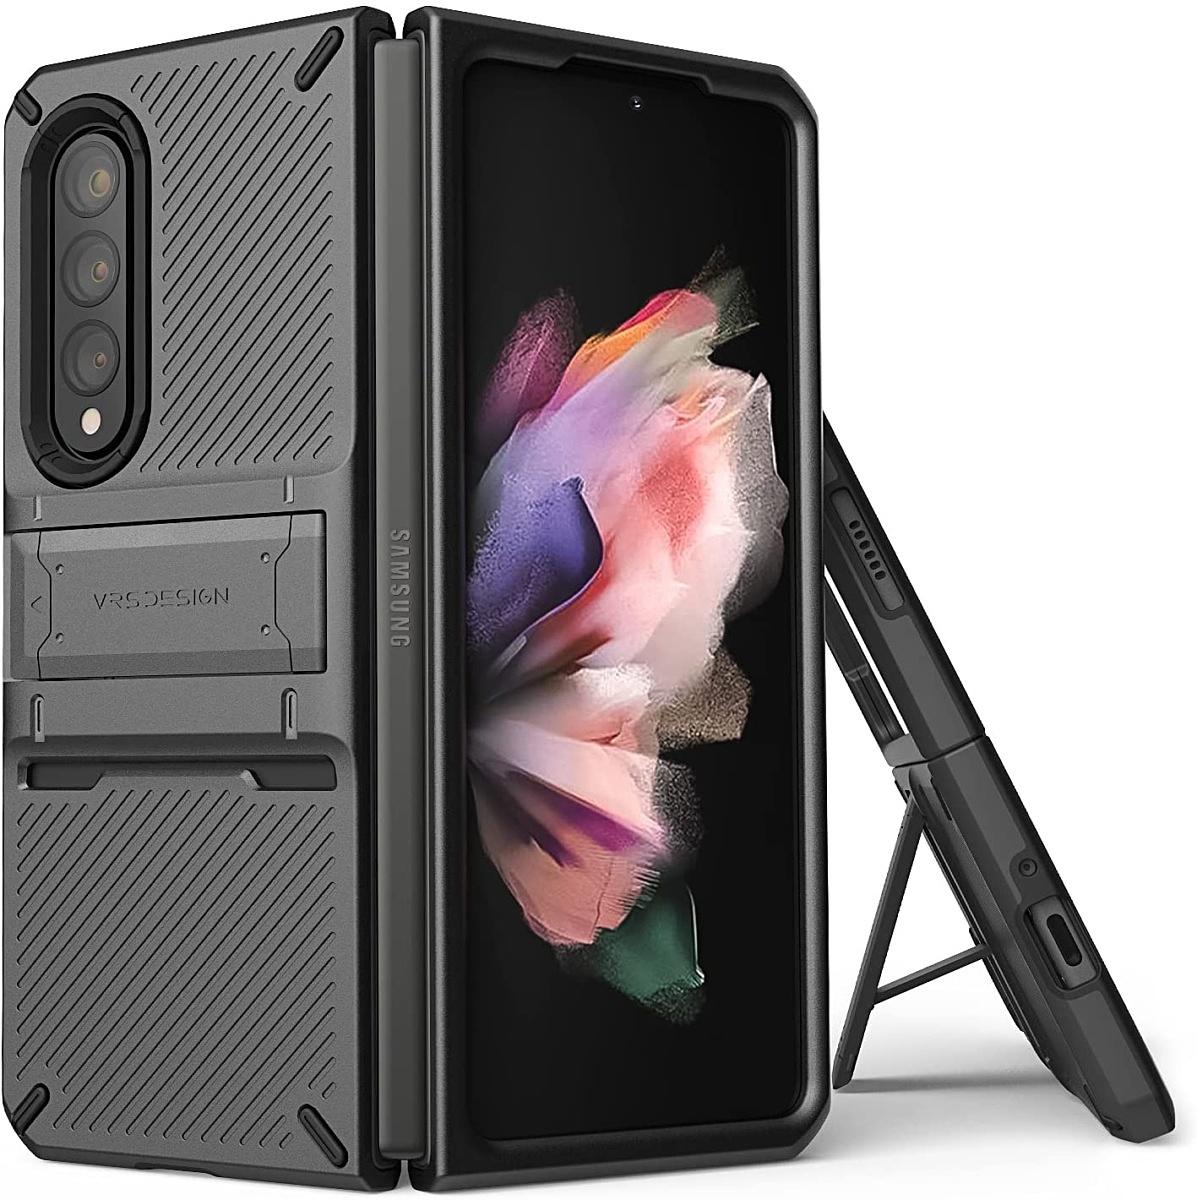 At  ,800 For The Samsung Galaxy Z Fold 3, You’ll Want To Cover It With One Of These Cases 